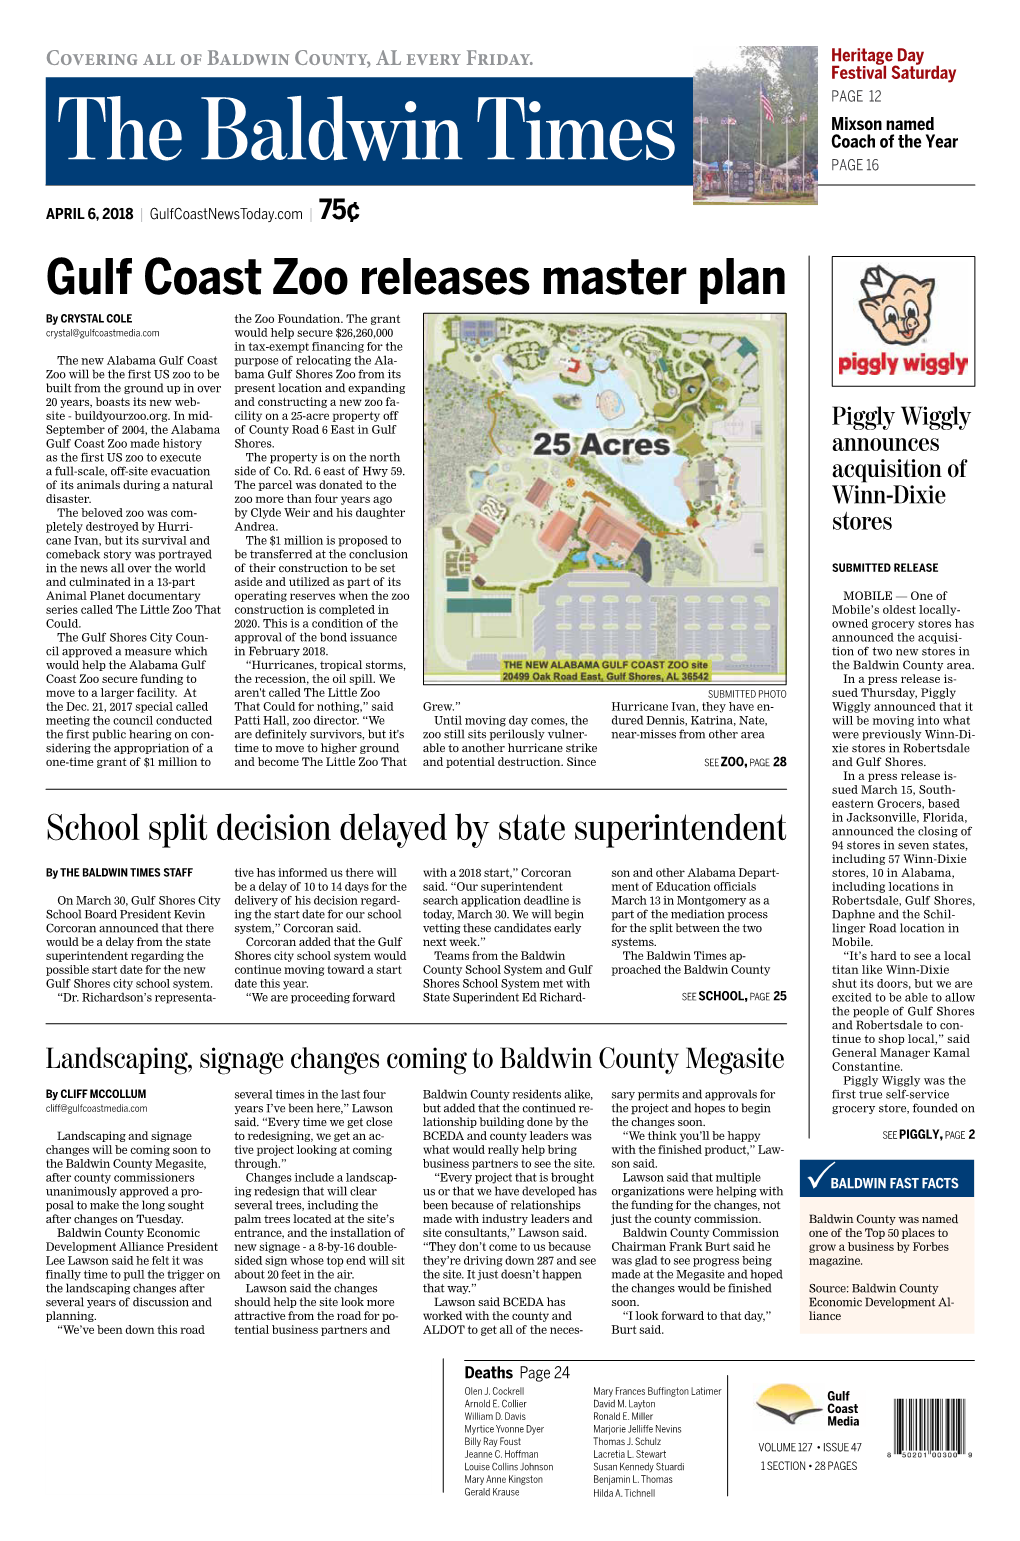 Gulf Coast Zoo Releases Master Plan by CRYSTAL COLE the Zoo Foundation